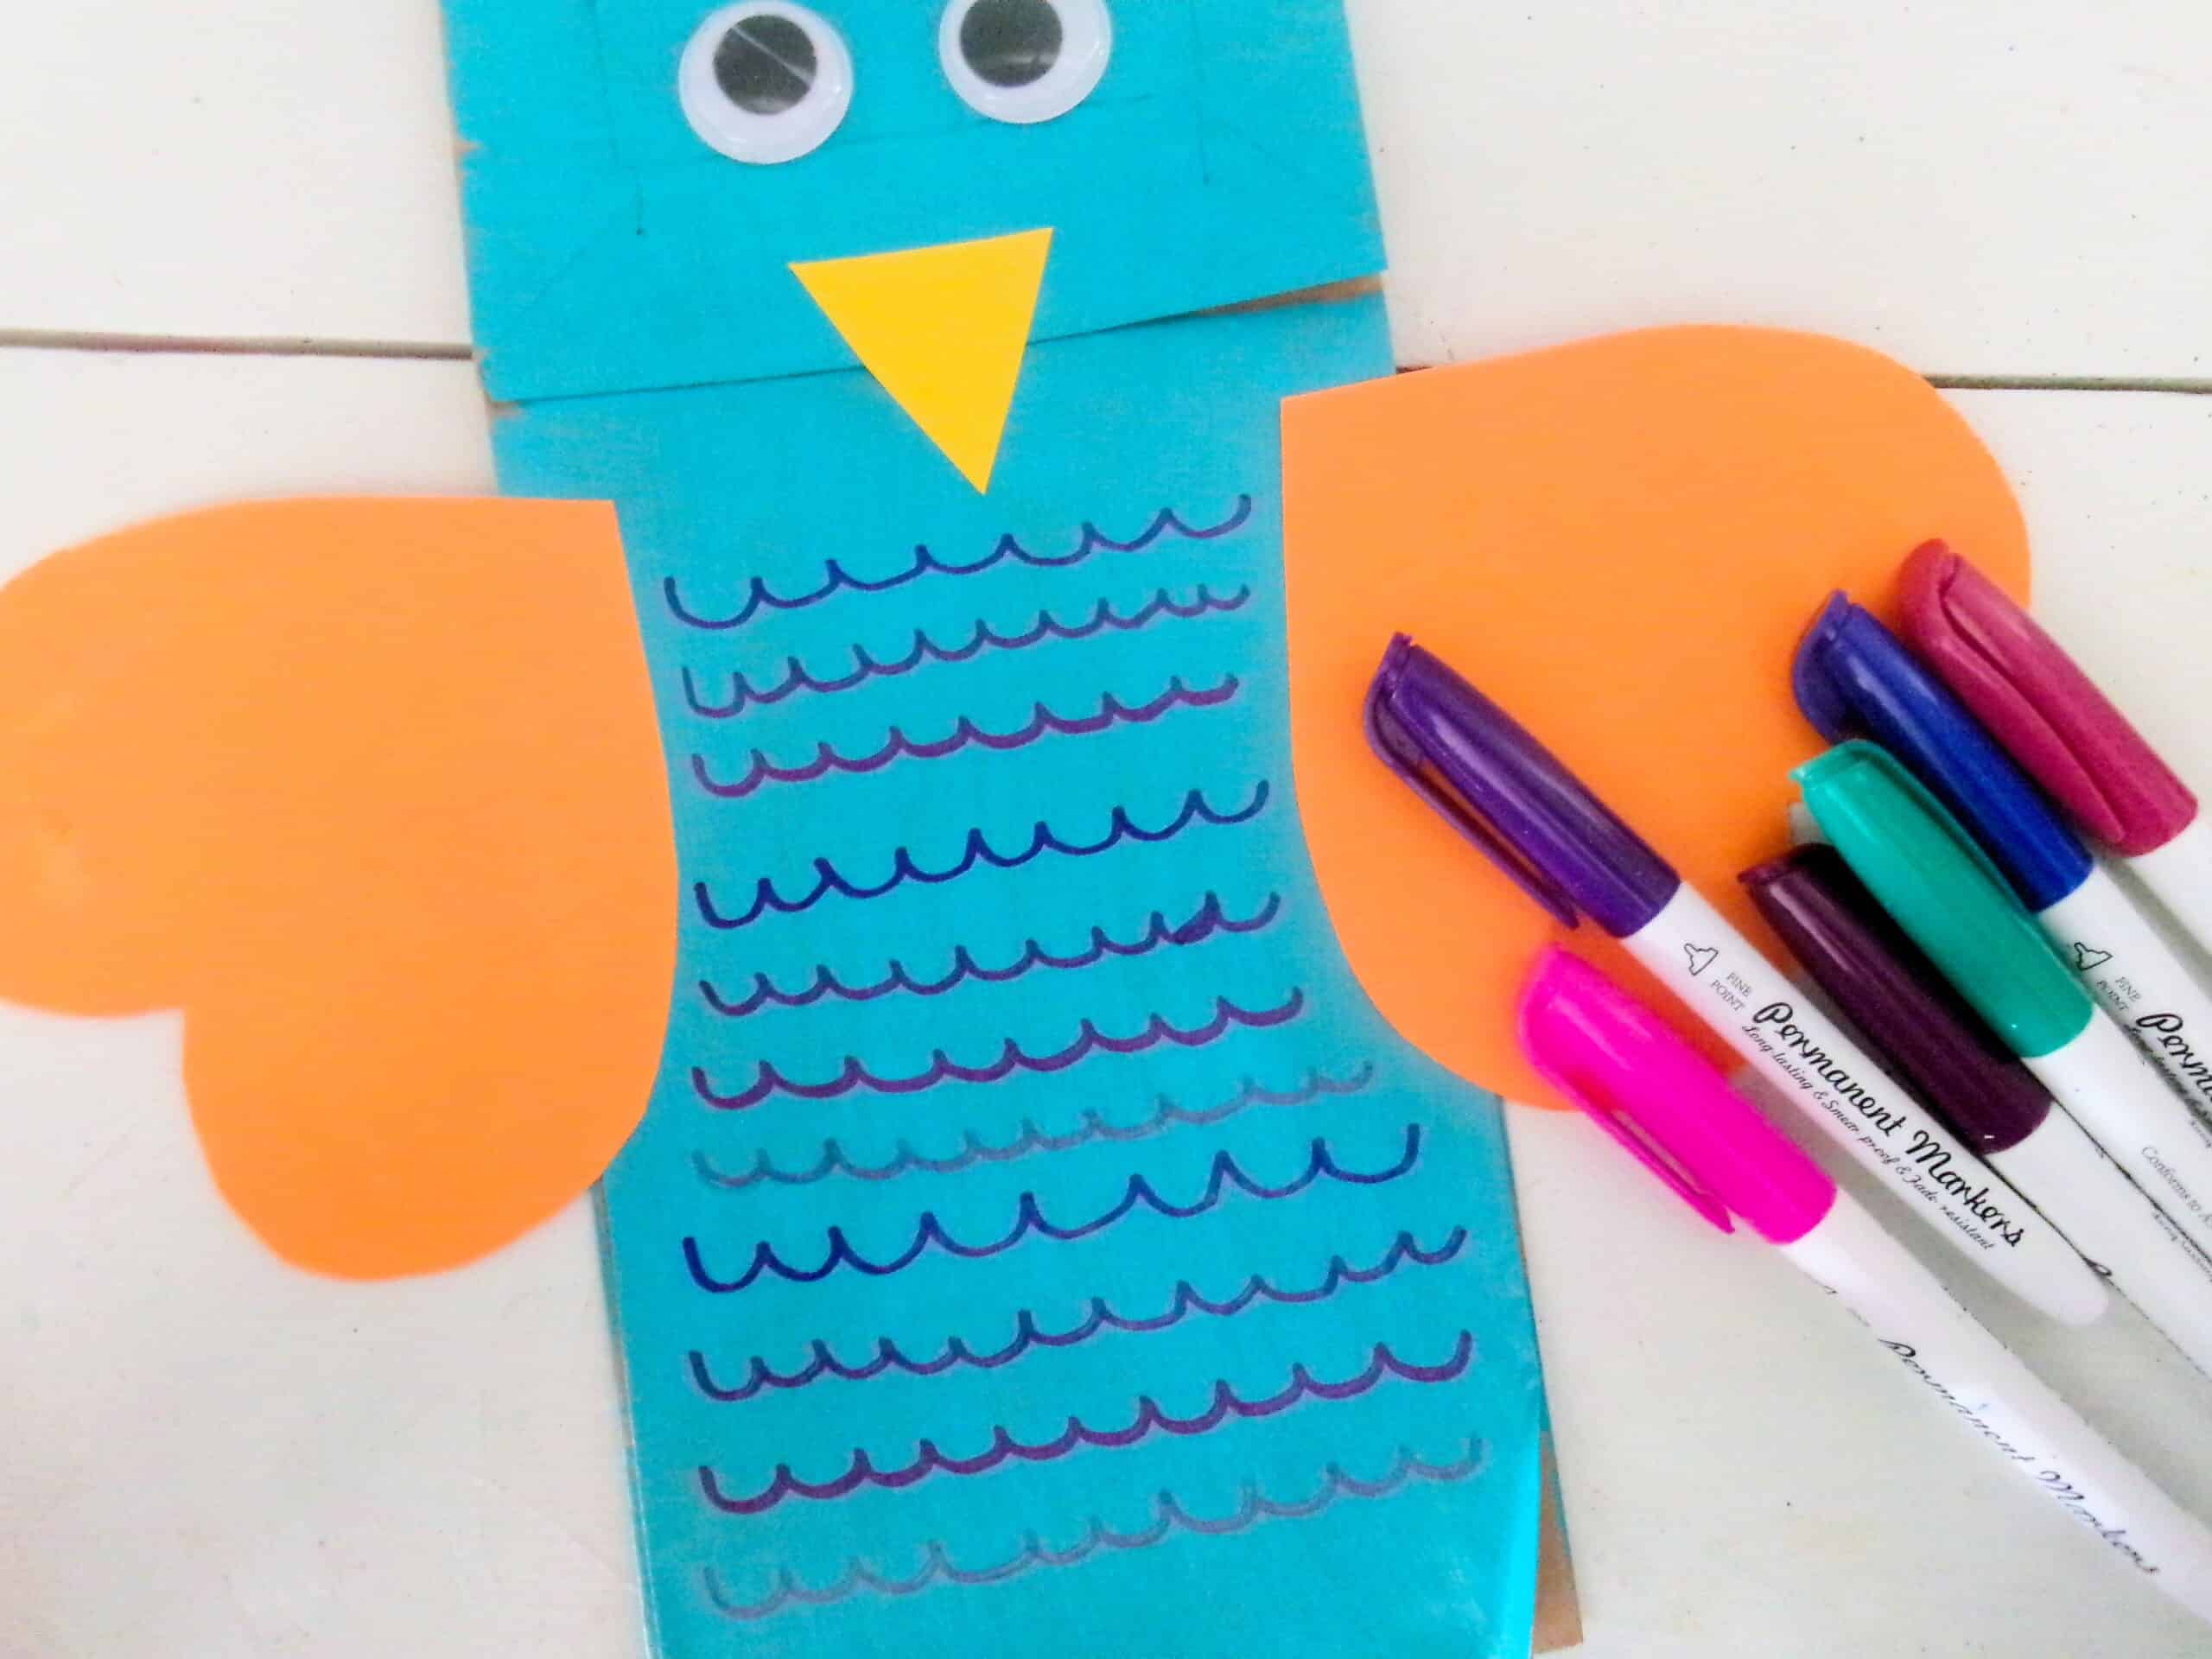 Use the markers to draw details down the front of the front of the body of the bird.